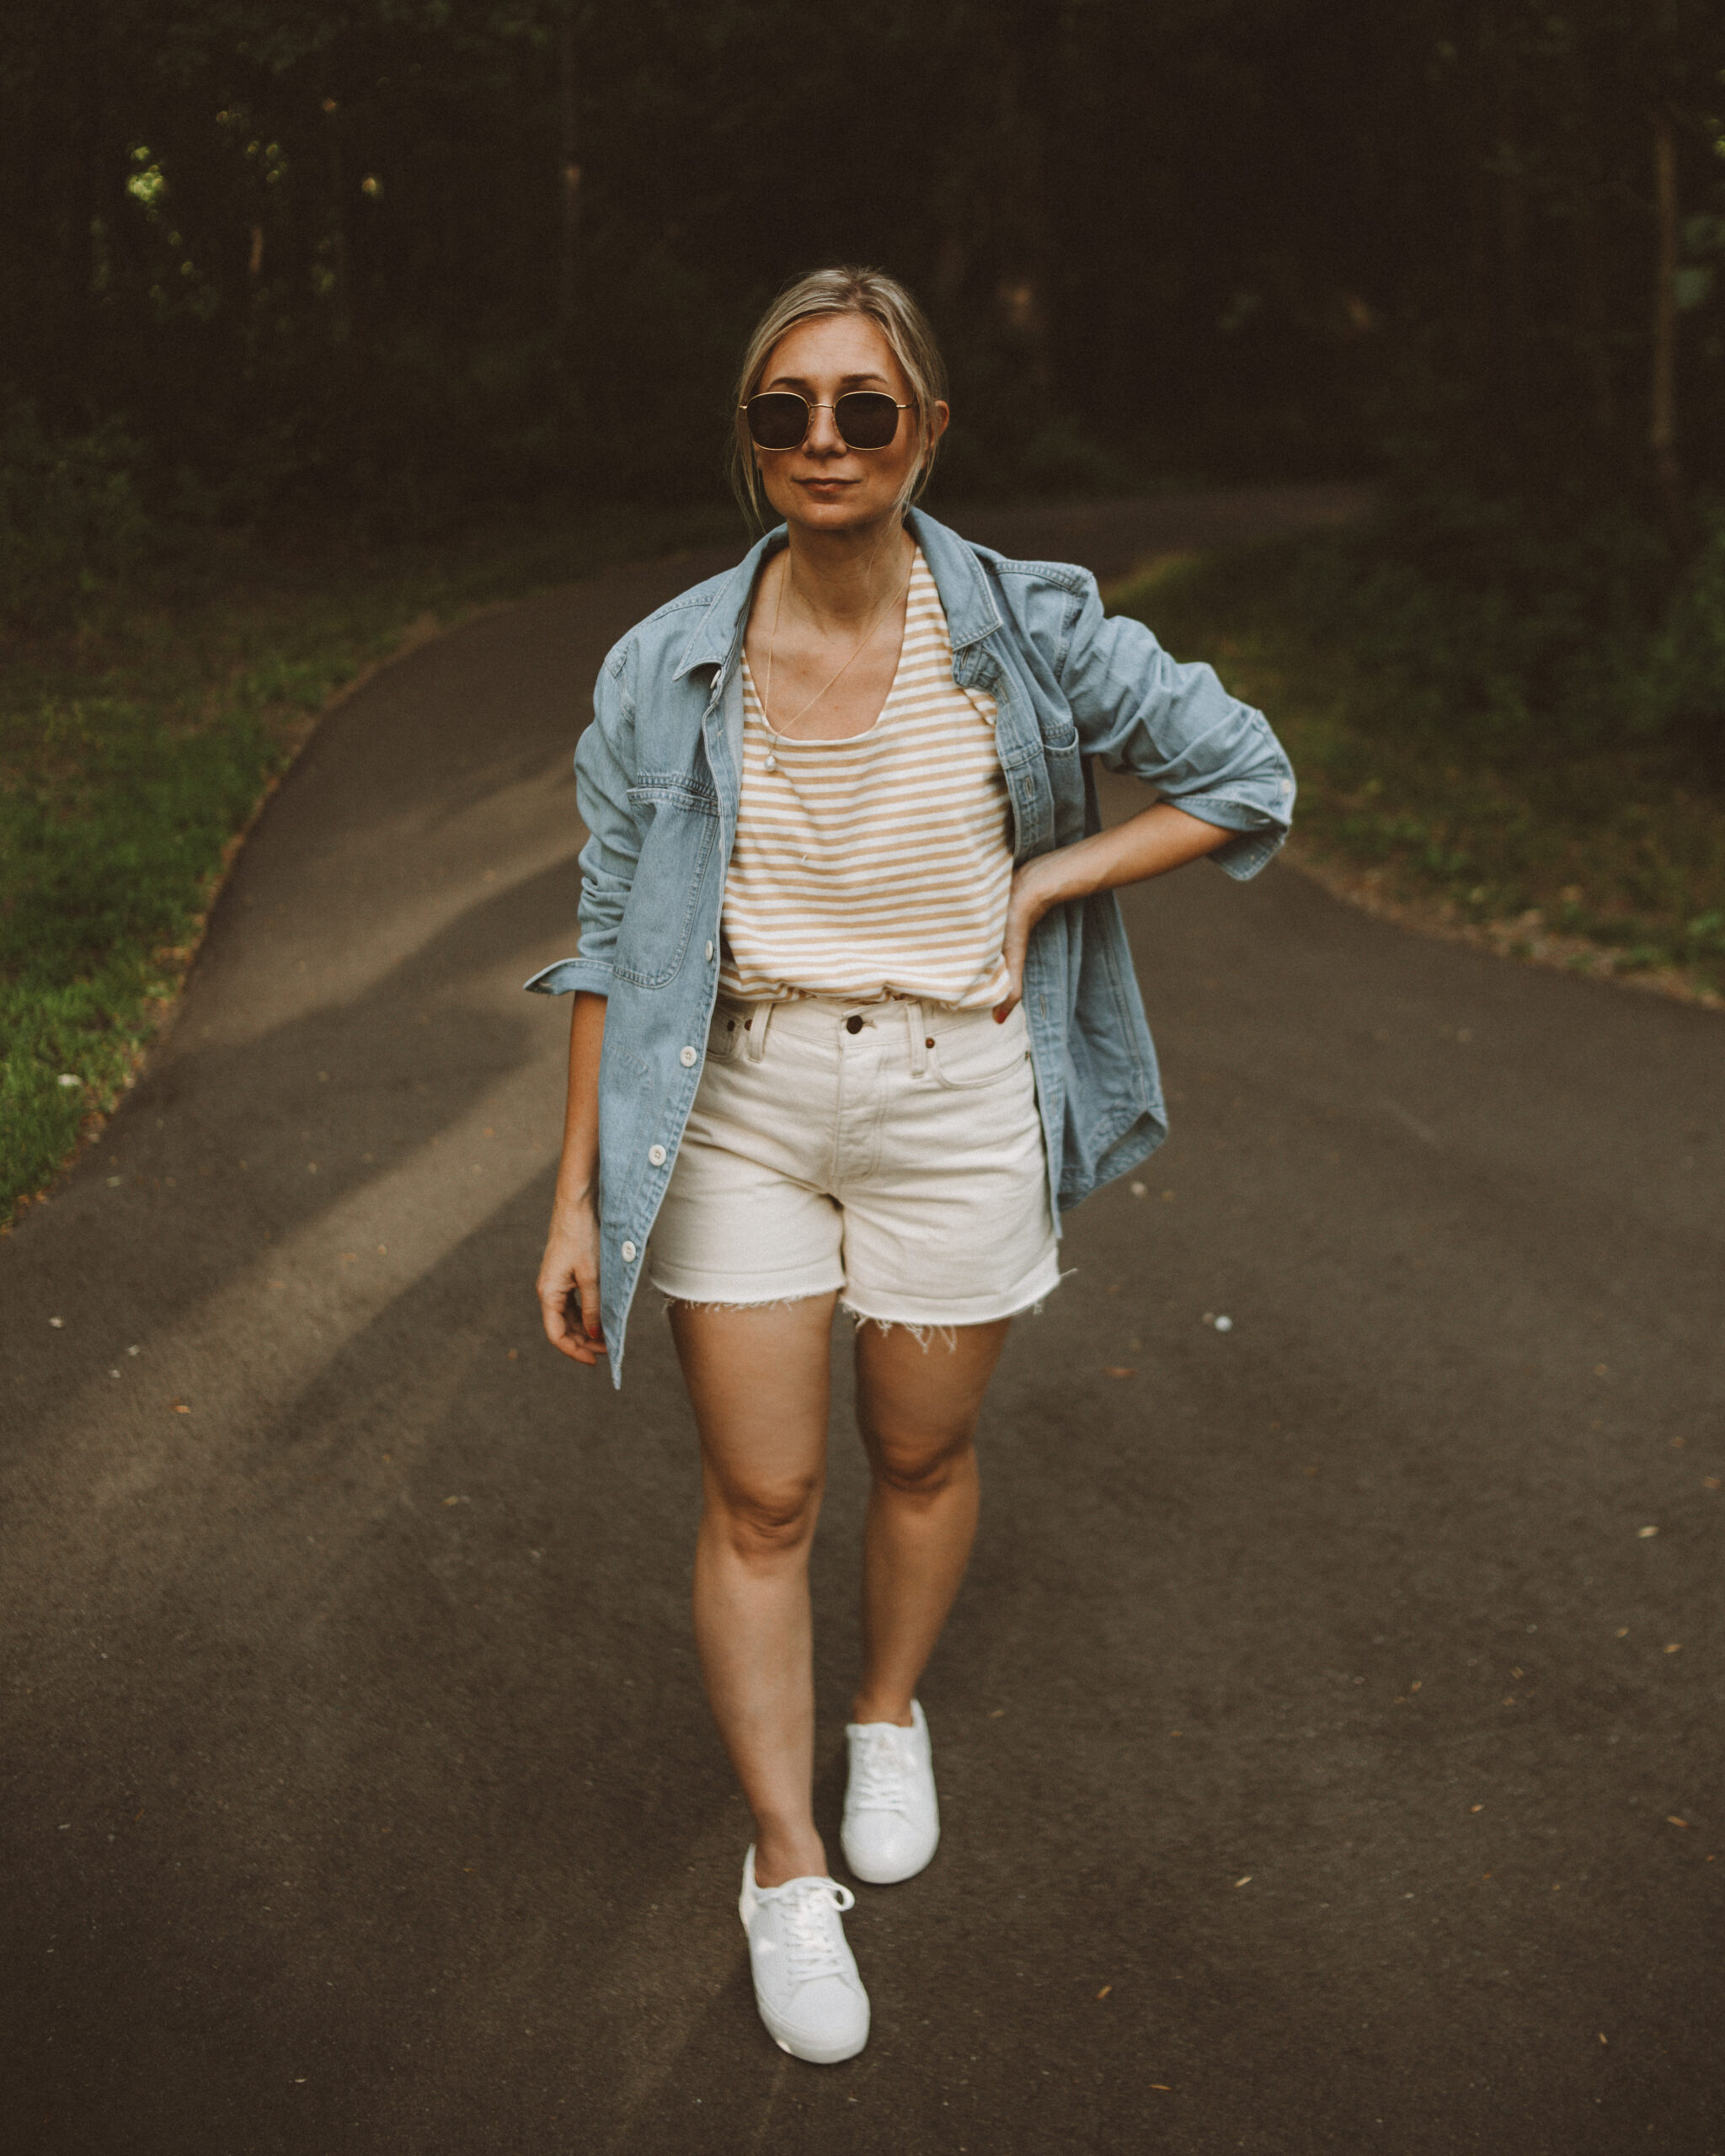 Karin Emily wears a striped tee, cream jean shorts, white sneakers and a light wash denim shirt jacket